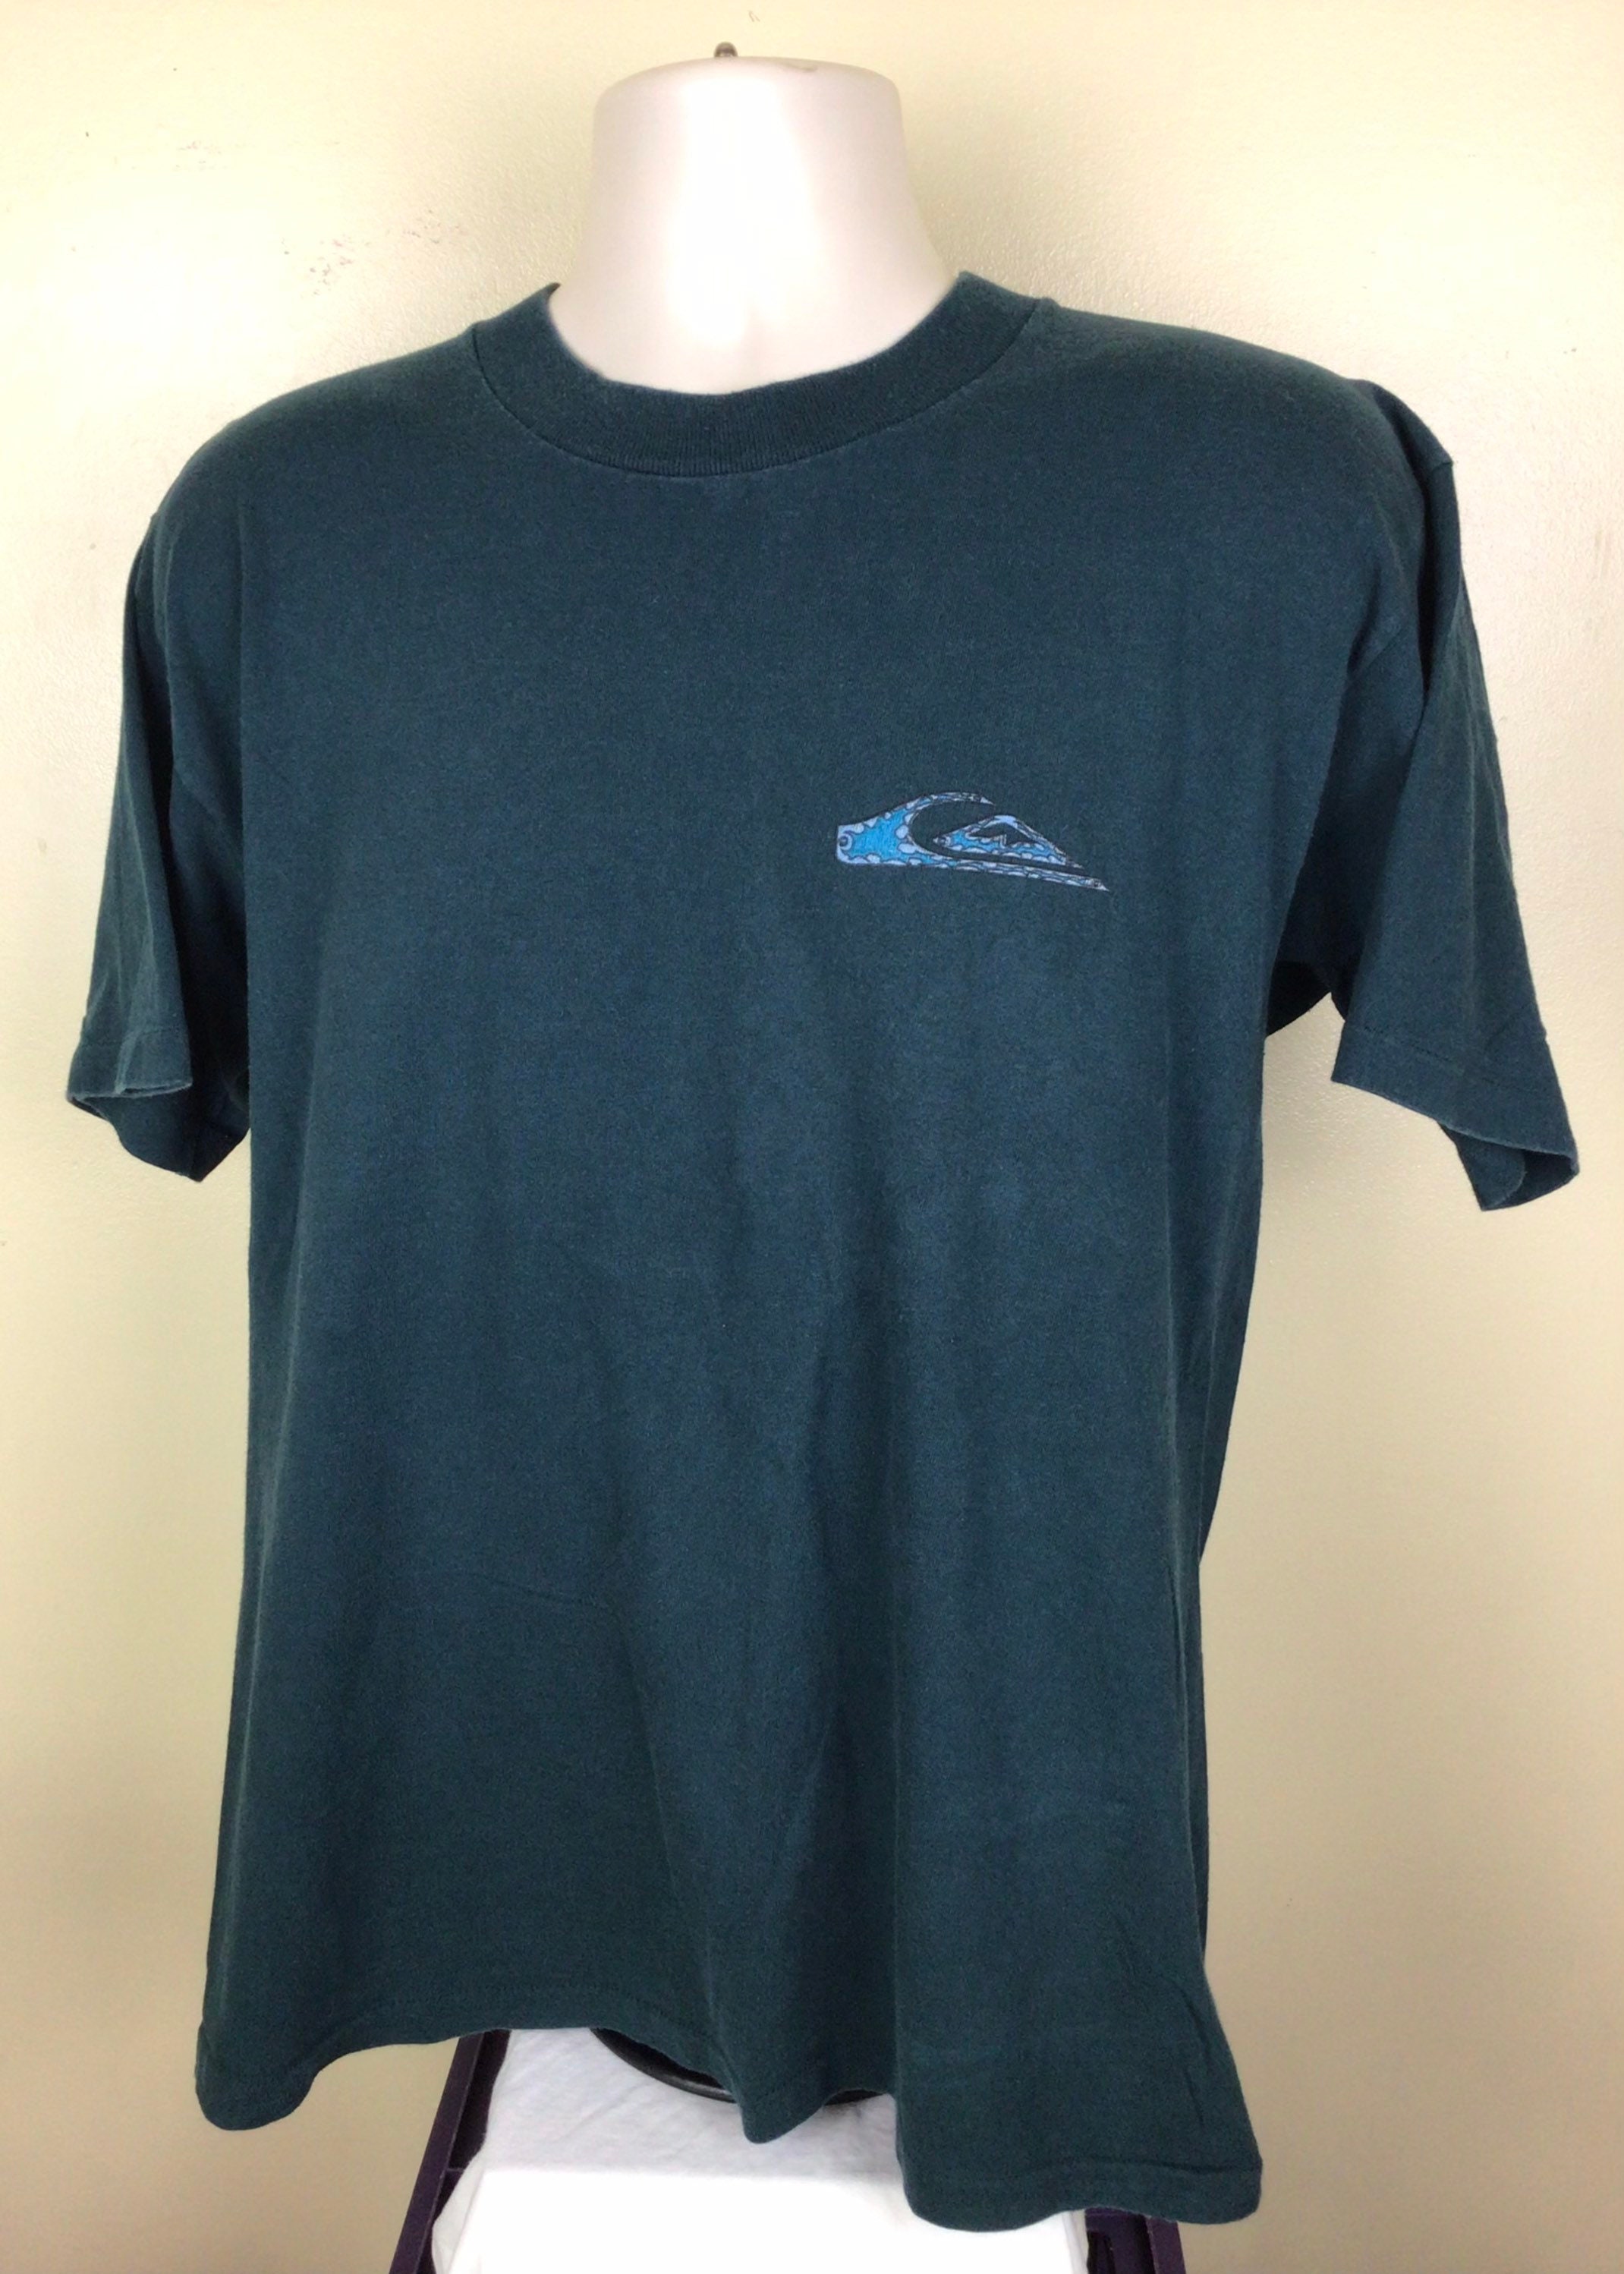 Finland Green Stitch T-shirt Vtg Teal Single Etsy Made - L Skate Surf 90s USA Brand Quiksilver in